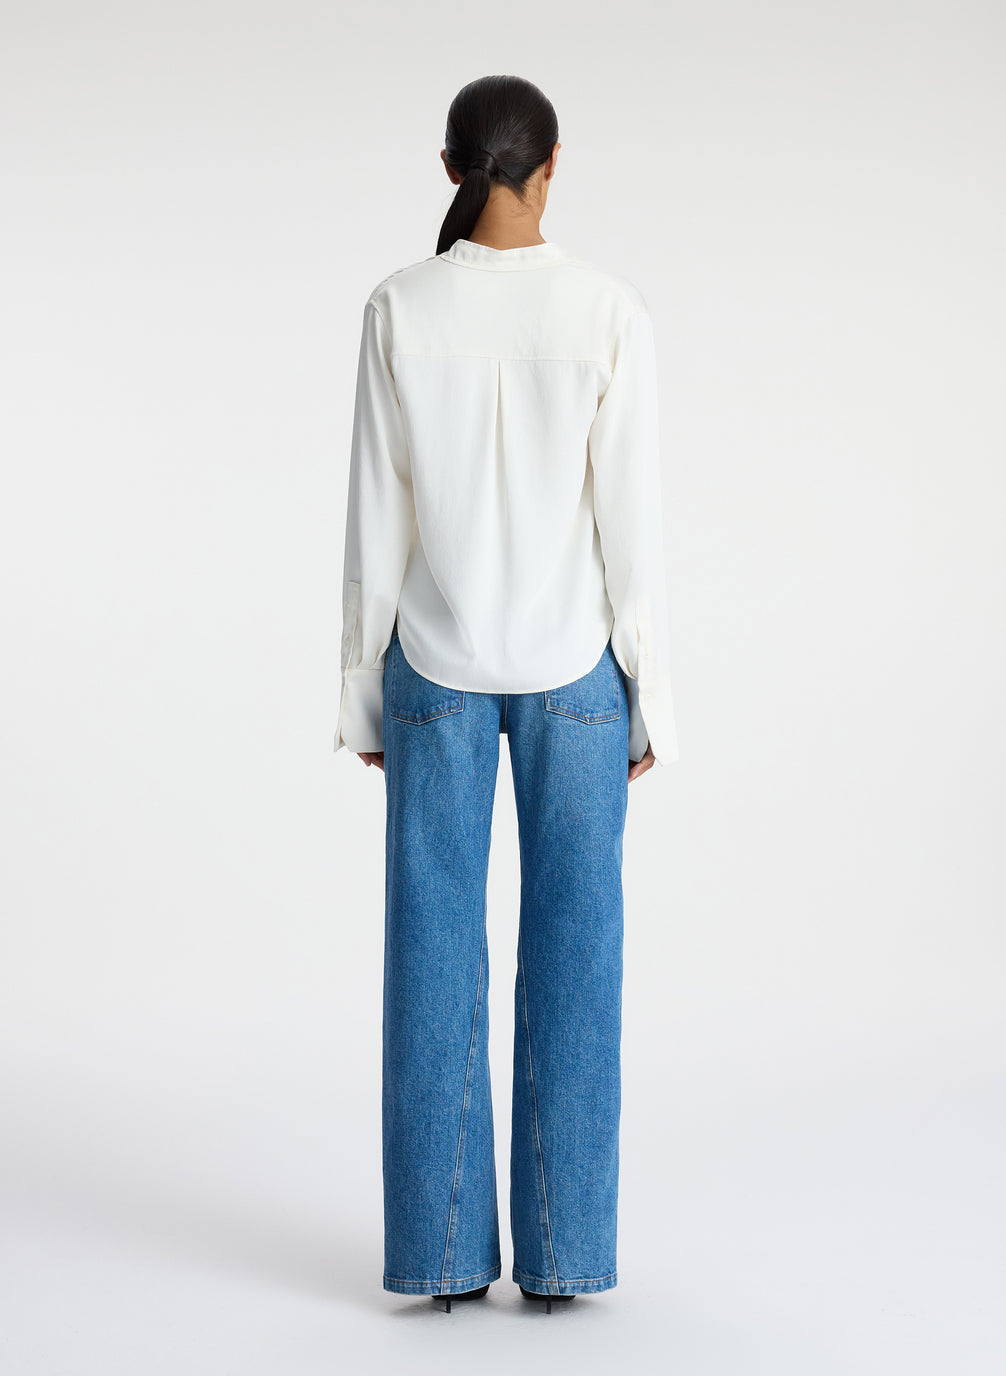 back view of woman wearing white satin long sleeve button down and medium blue wash denim jeans